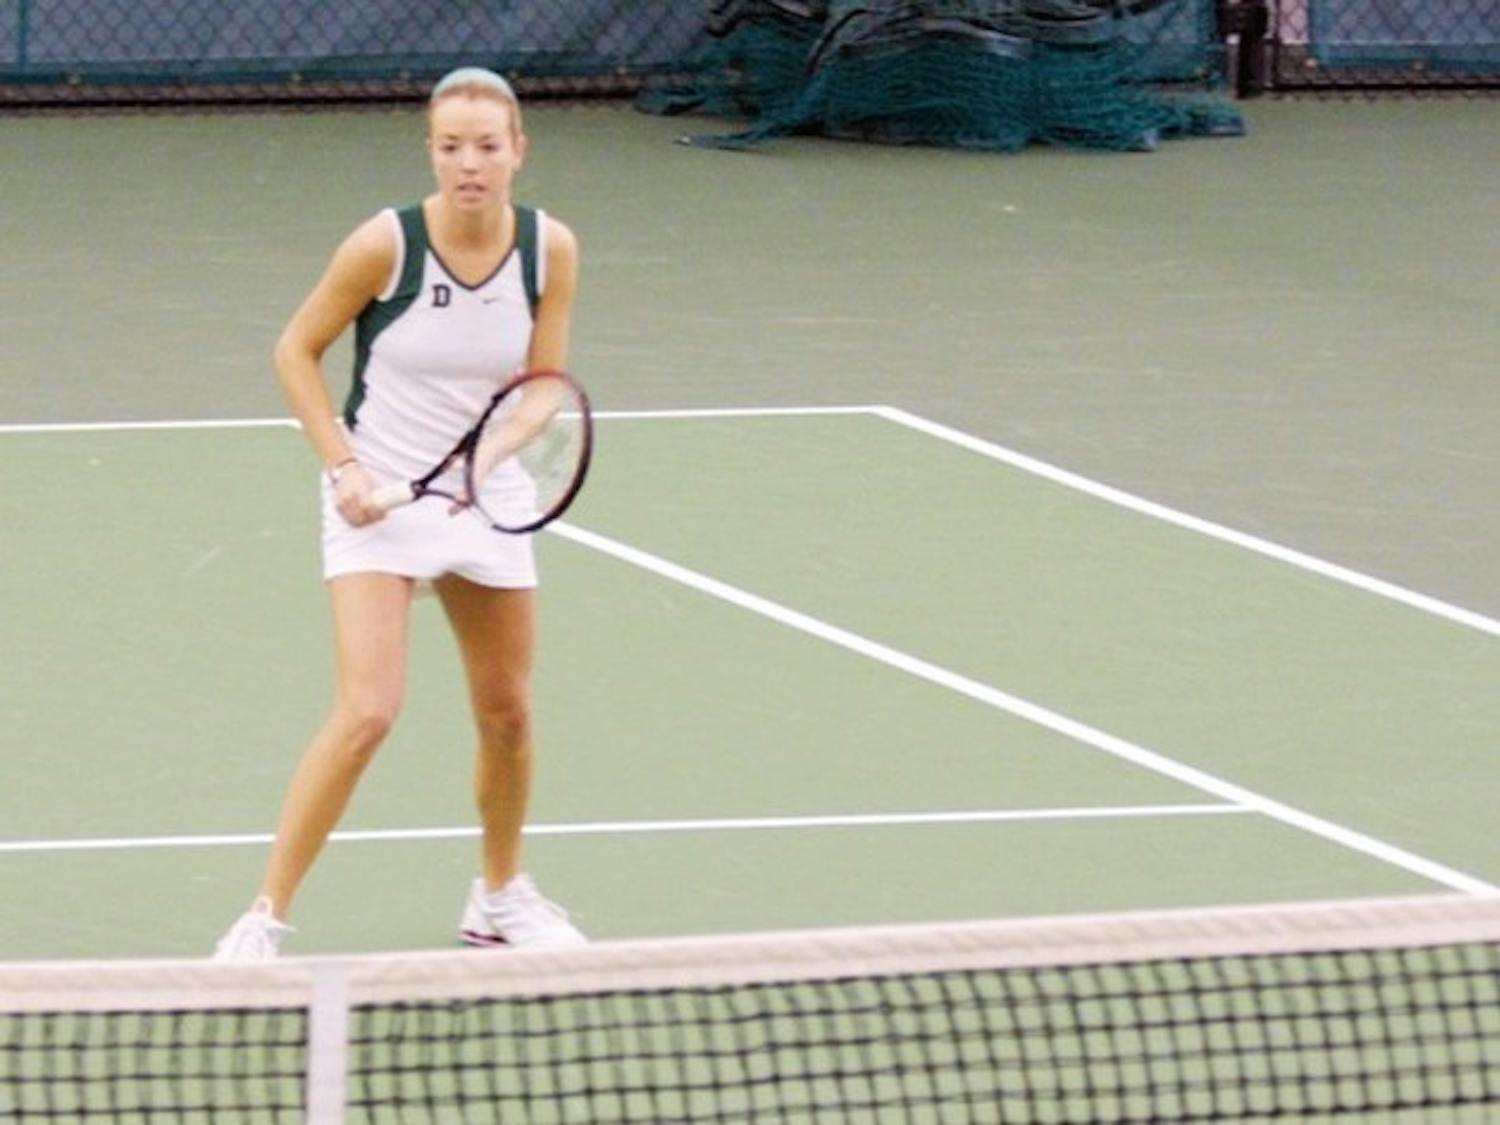 After leading Dartmouth in singles wins this season, Ann Scott '06 competed in her final collegiate match Tuesday.